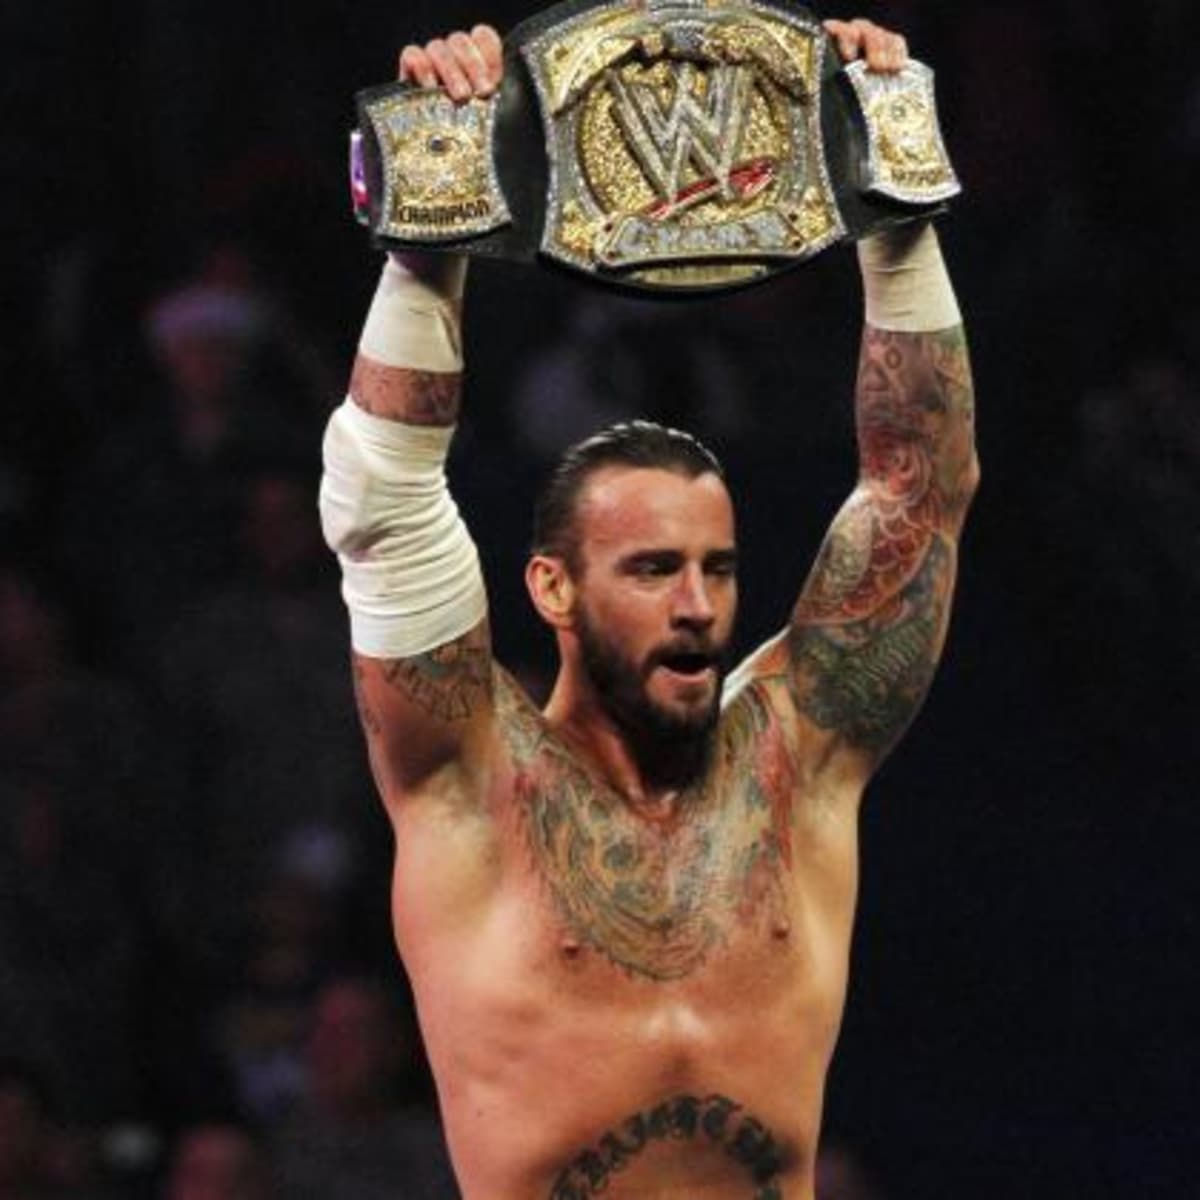 Pro-wrestler-turned-UFC-fighter CM Punk will always be a hockey